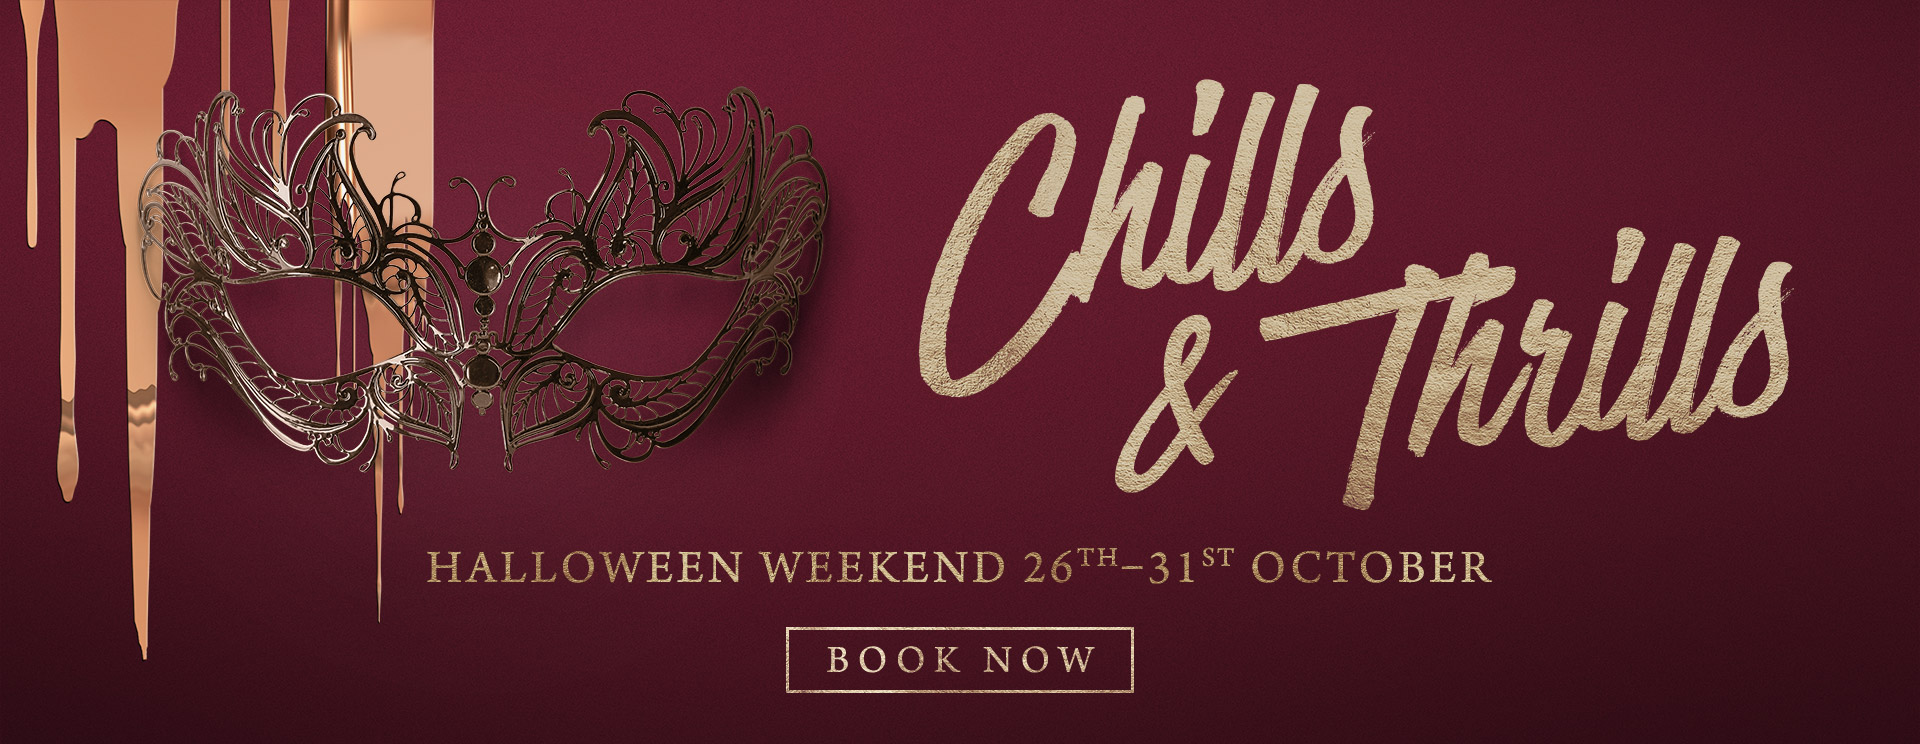 Chills & Thrills this Halloween at The Cock Inn